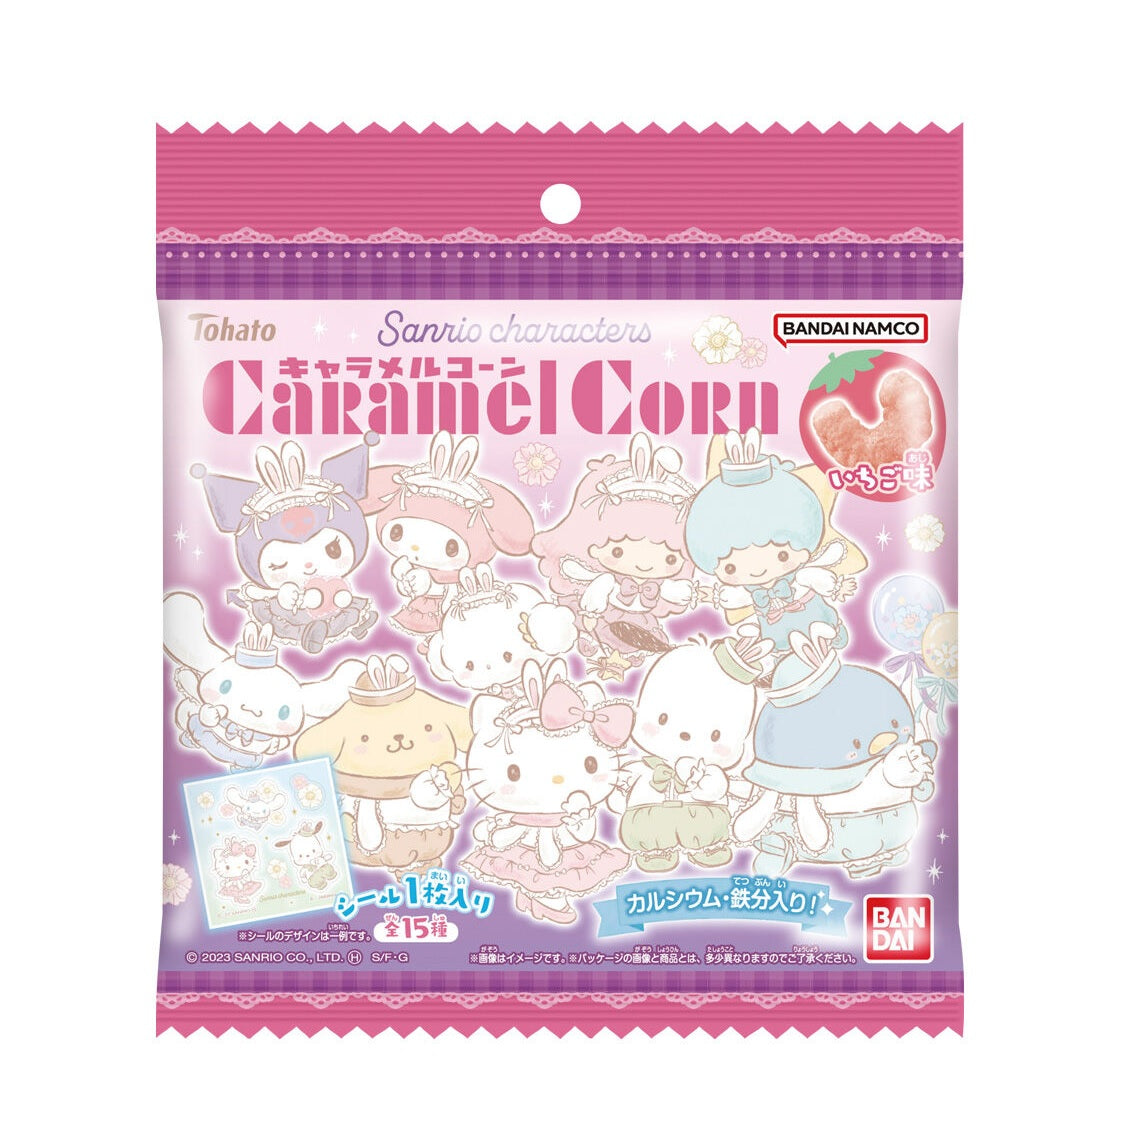 Caramel Corn Strawberry - Sanrio Characters special edition